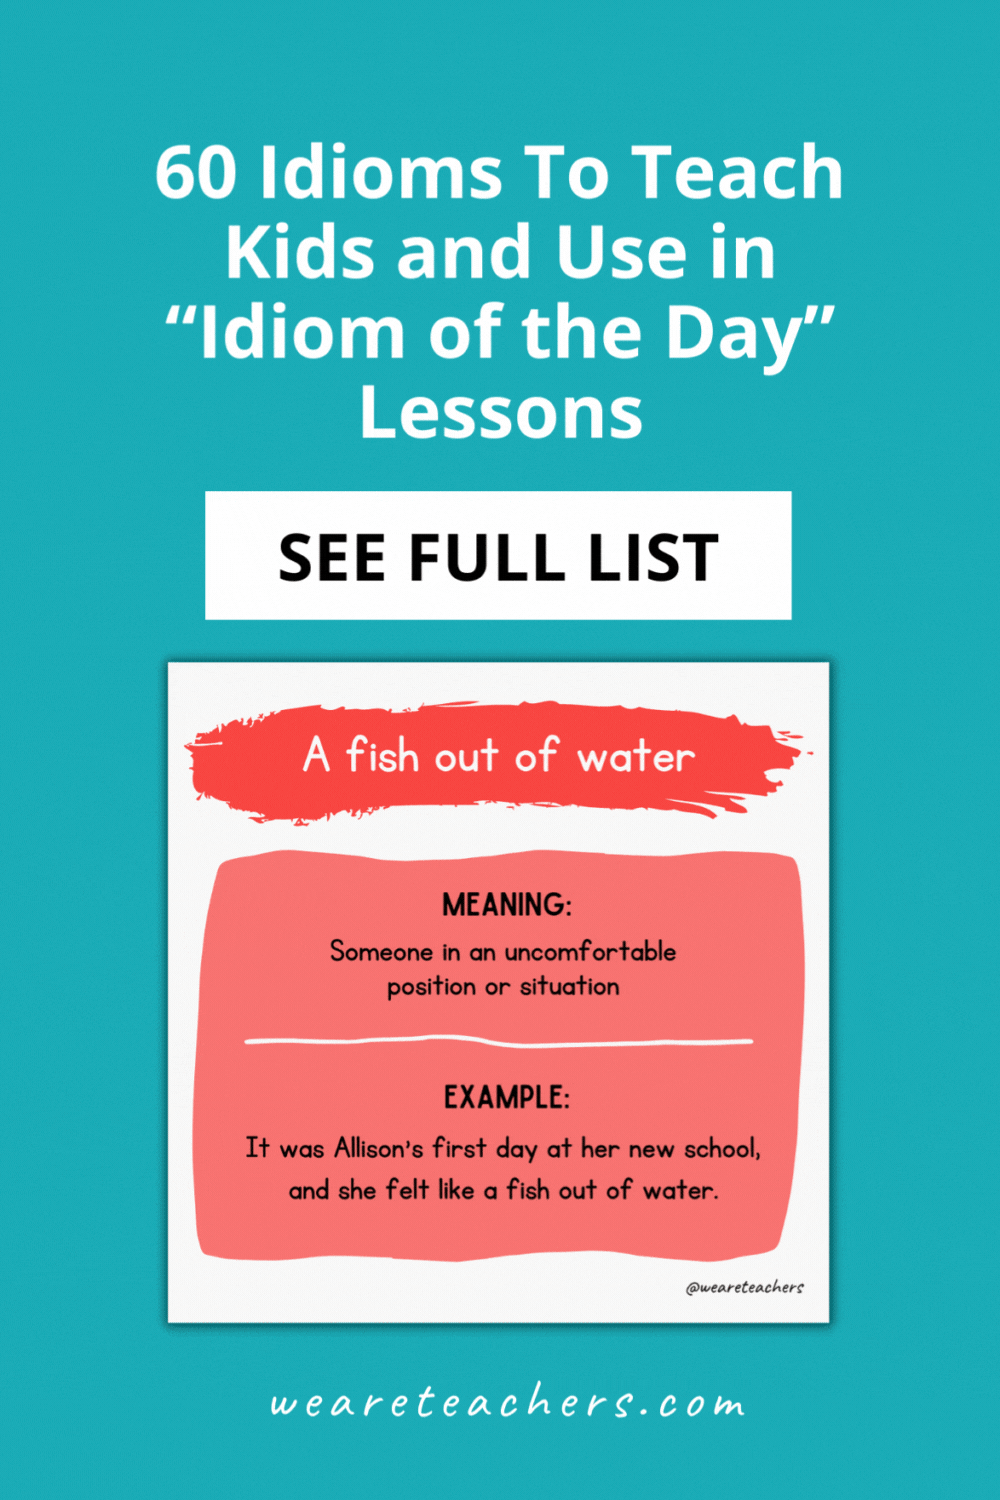 Idioms are expressions that don't always make sense literally. Use these examples in Idiom of the Day lessons for students.